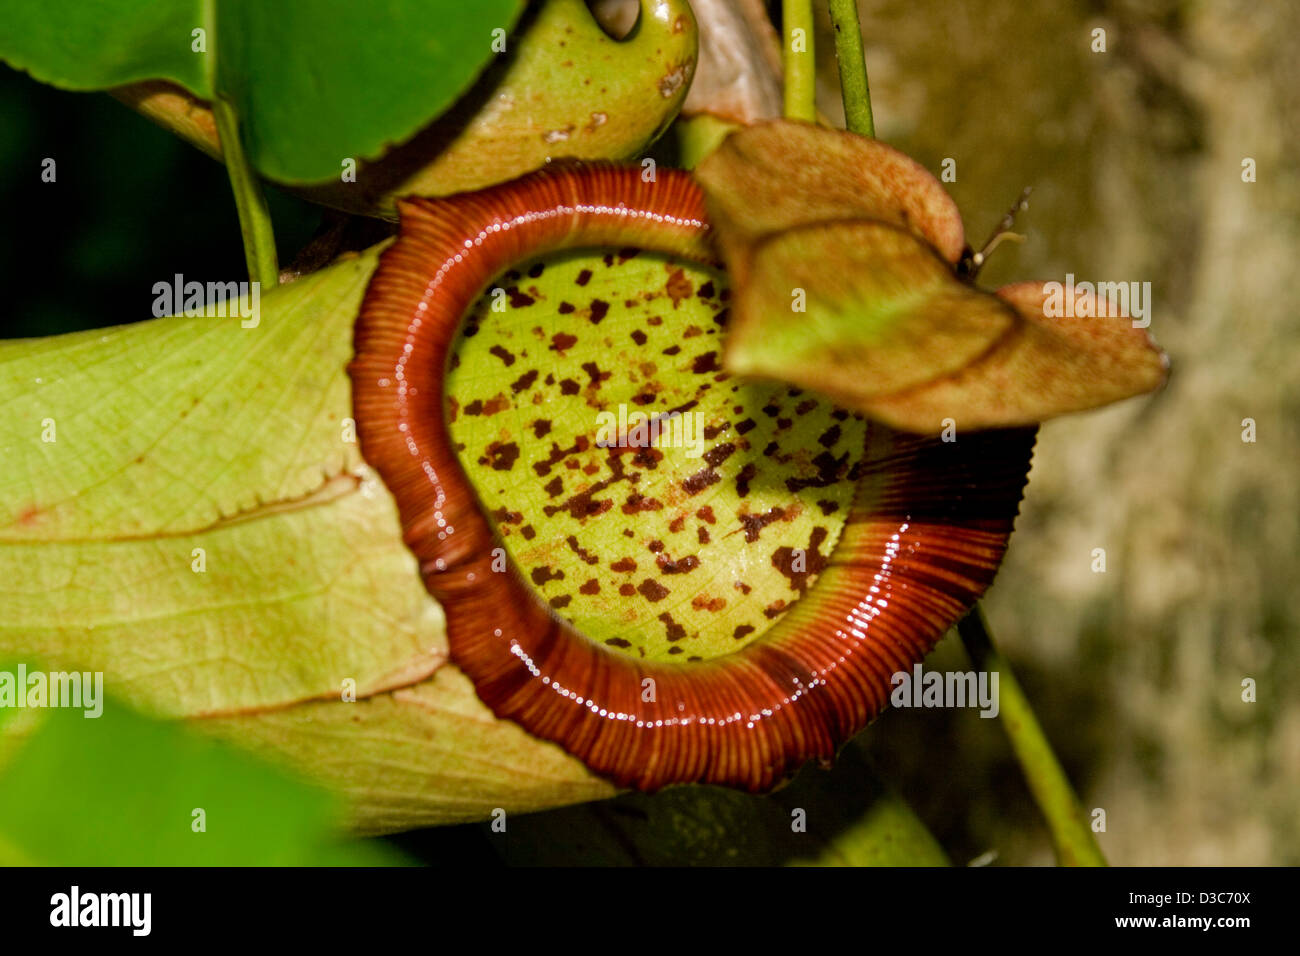 Close up of large gaping mouth and speckled throat  of Nepenthes sibuyanensis x truncata - carnivorous pitcher plant Stock Photo